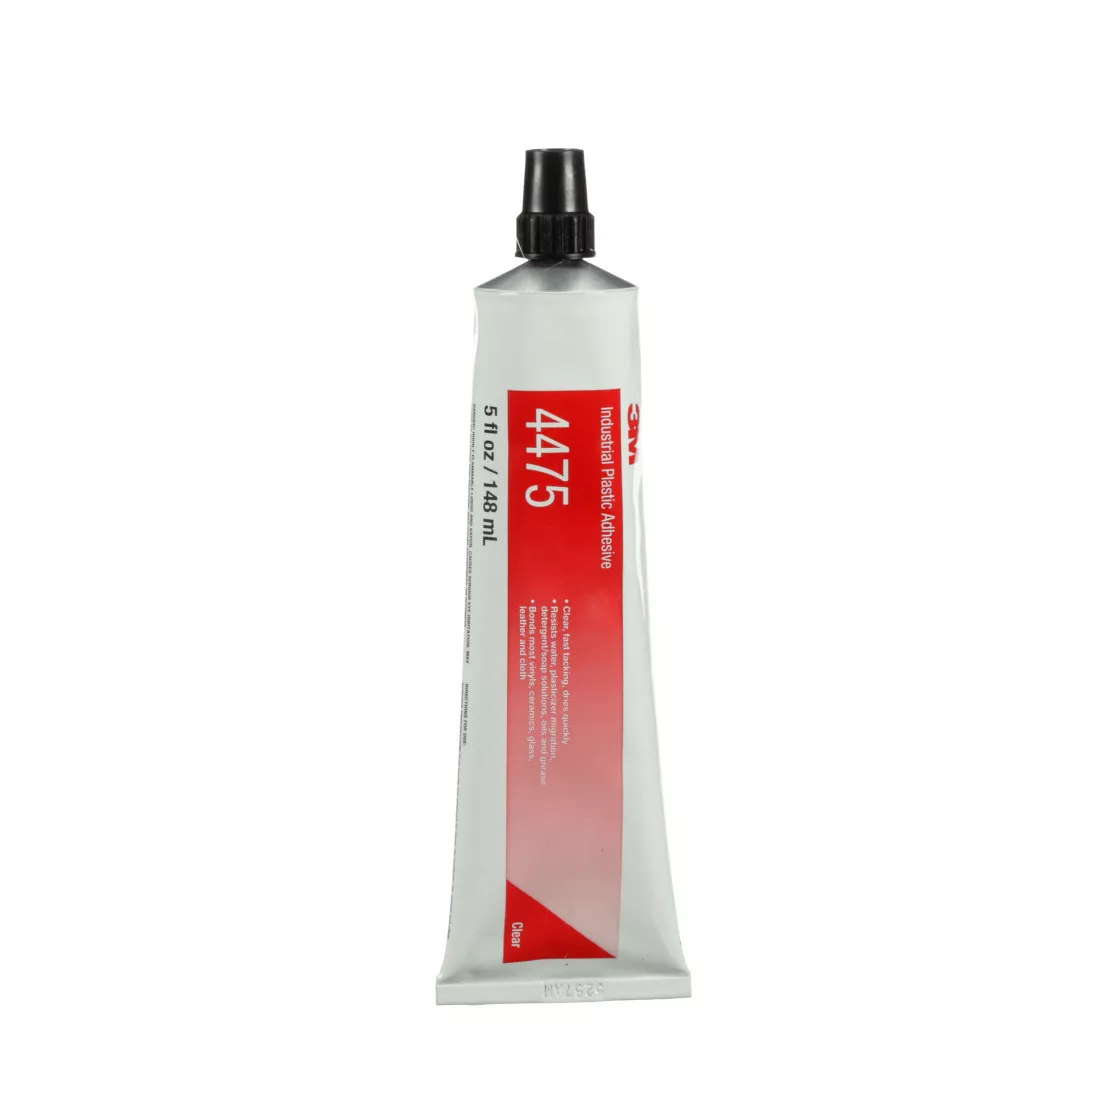 3M™ Industrial Plastic Adhesive 4475, Clear, 5 Oz Tube, 36/case